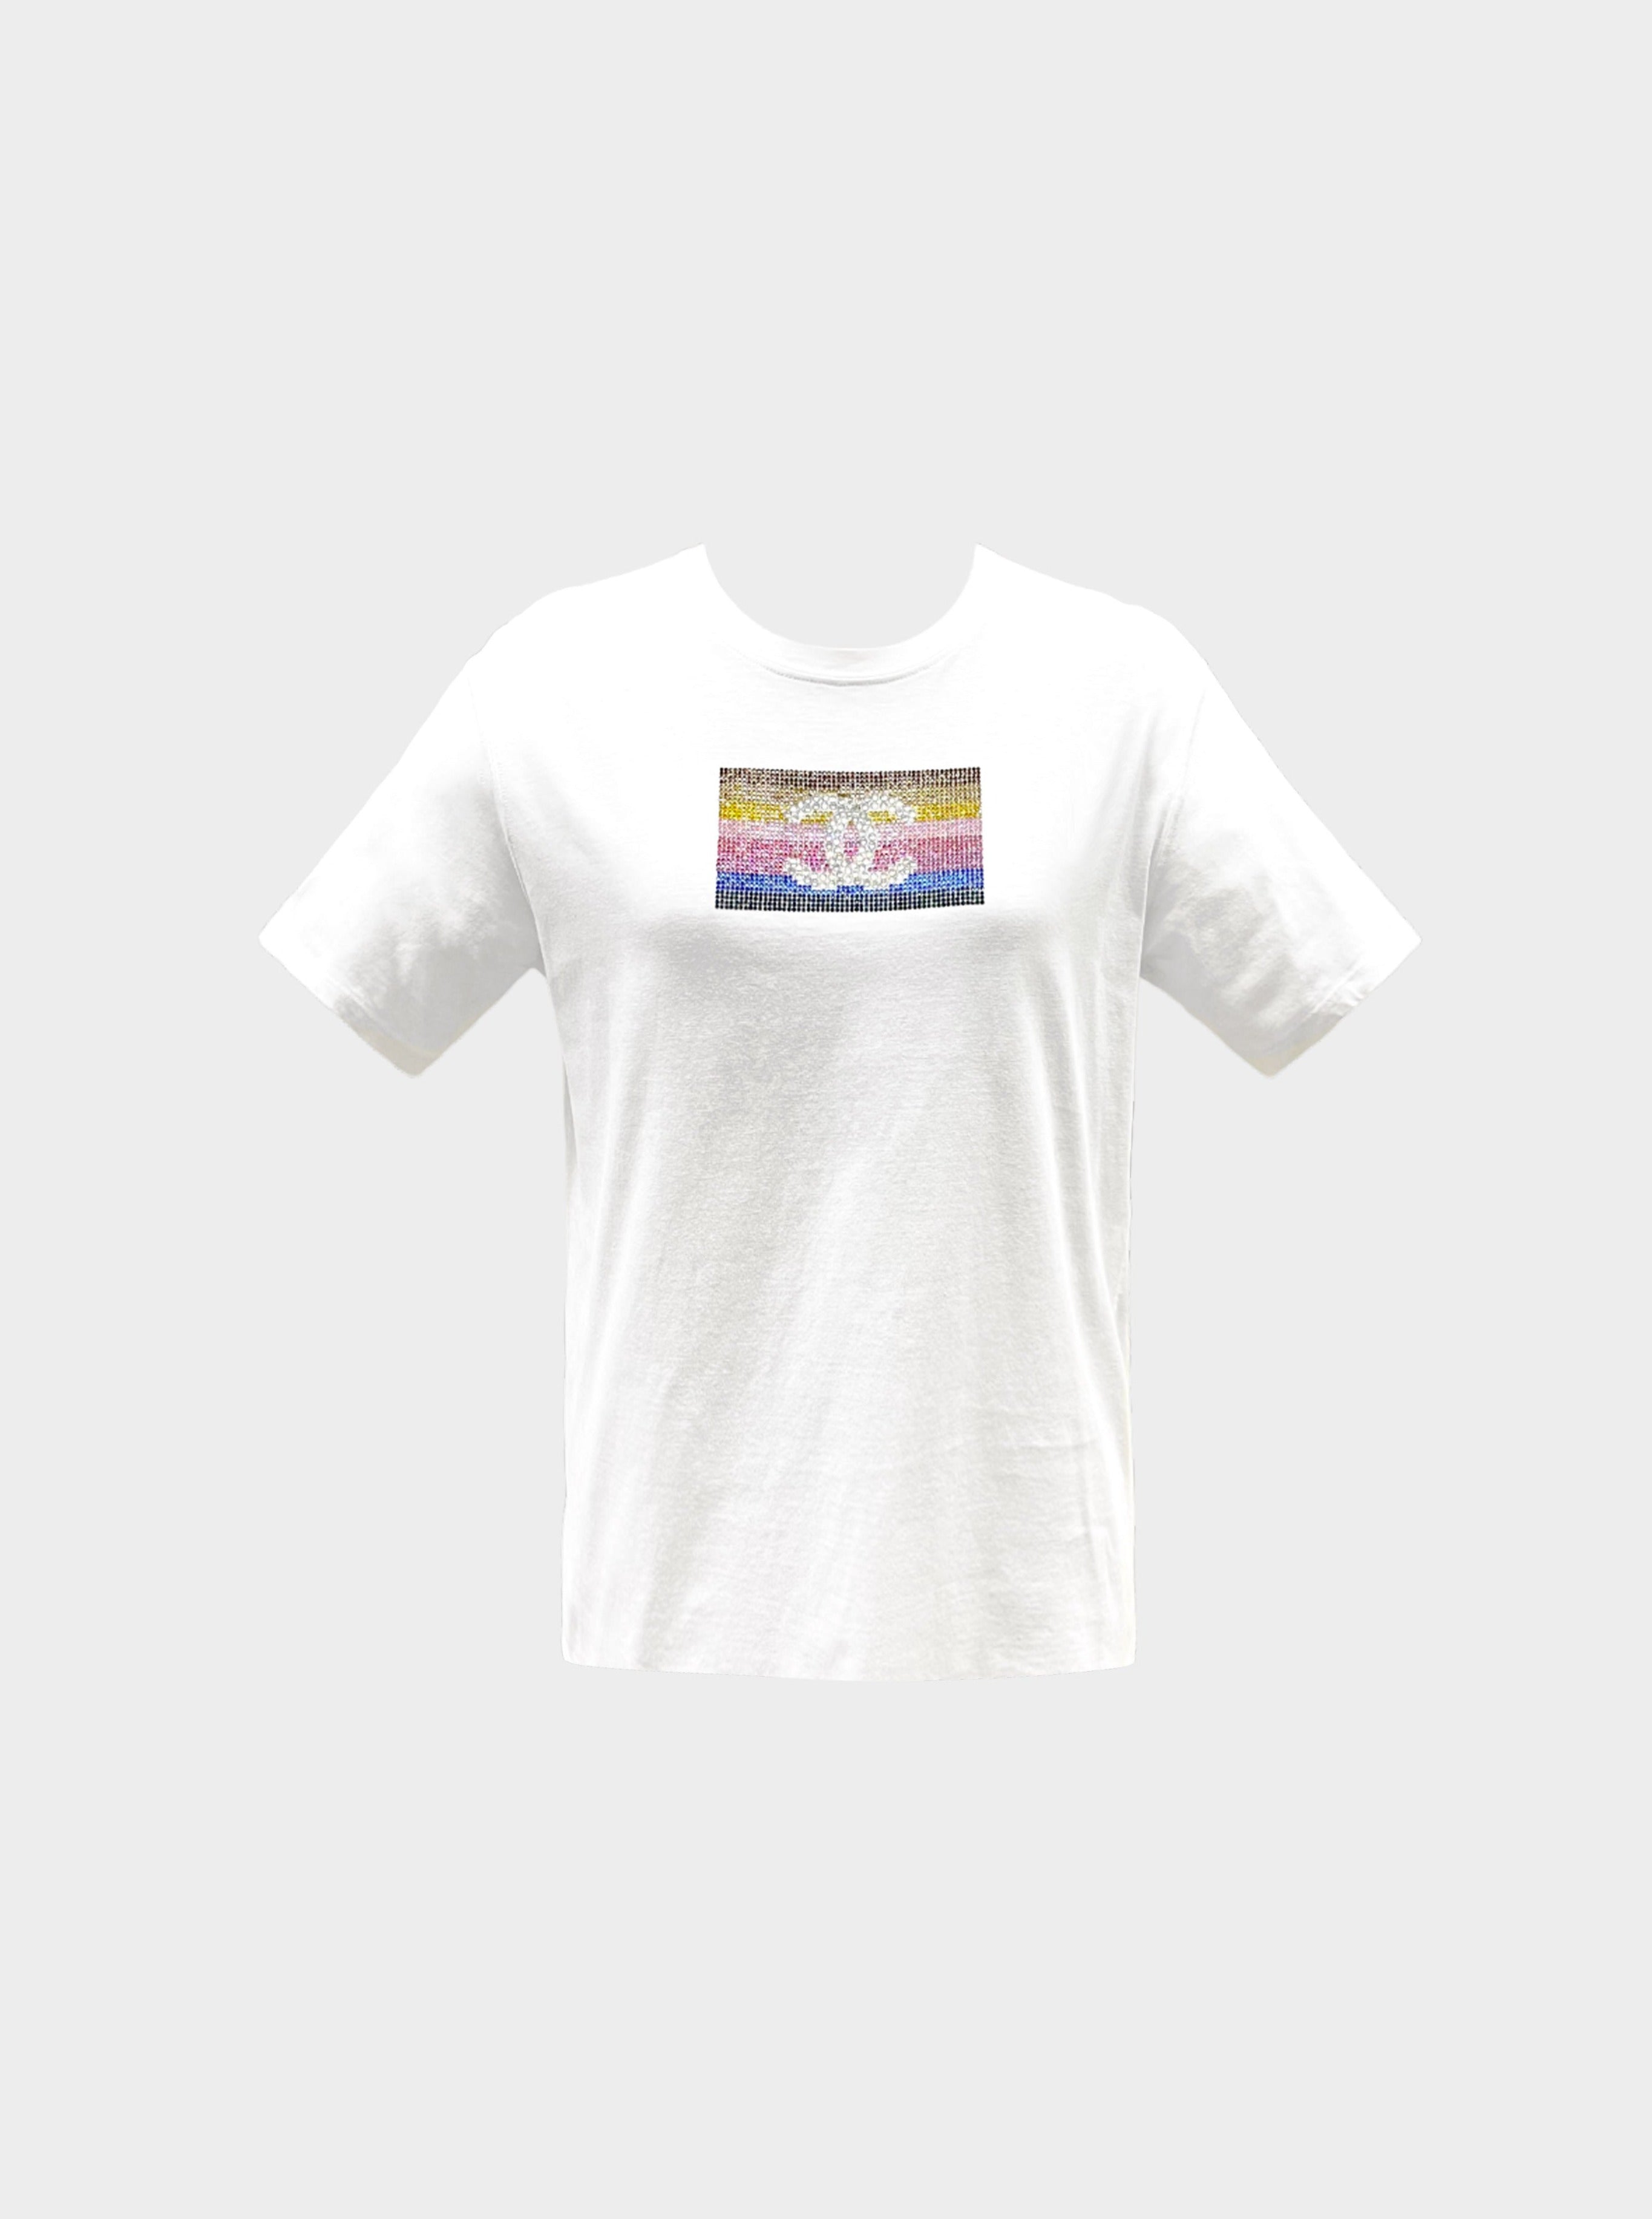 Chanel FW 2005 VIP Multicolor Crystals White Cotton T-Shirt